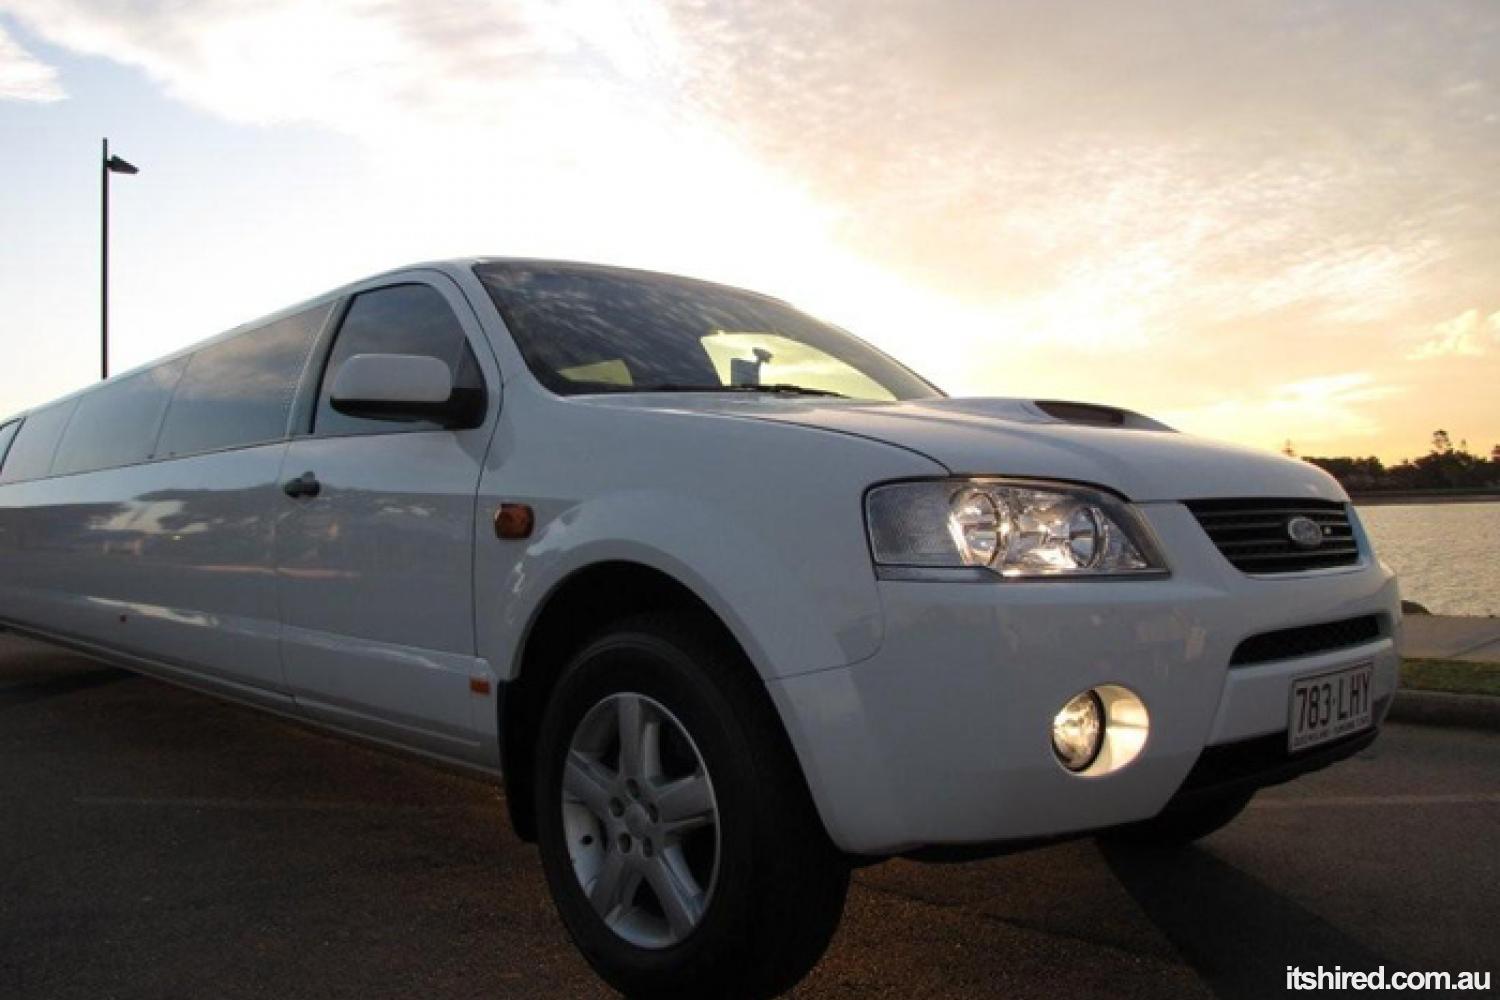 Ford territory limo adelaide #4